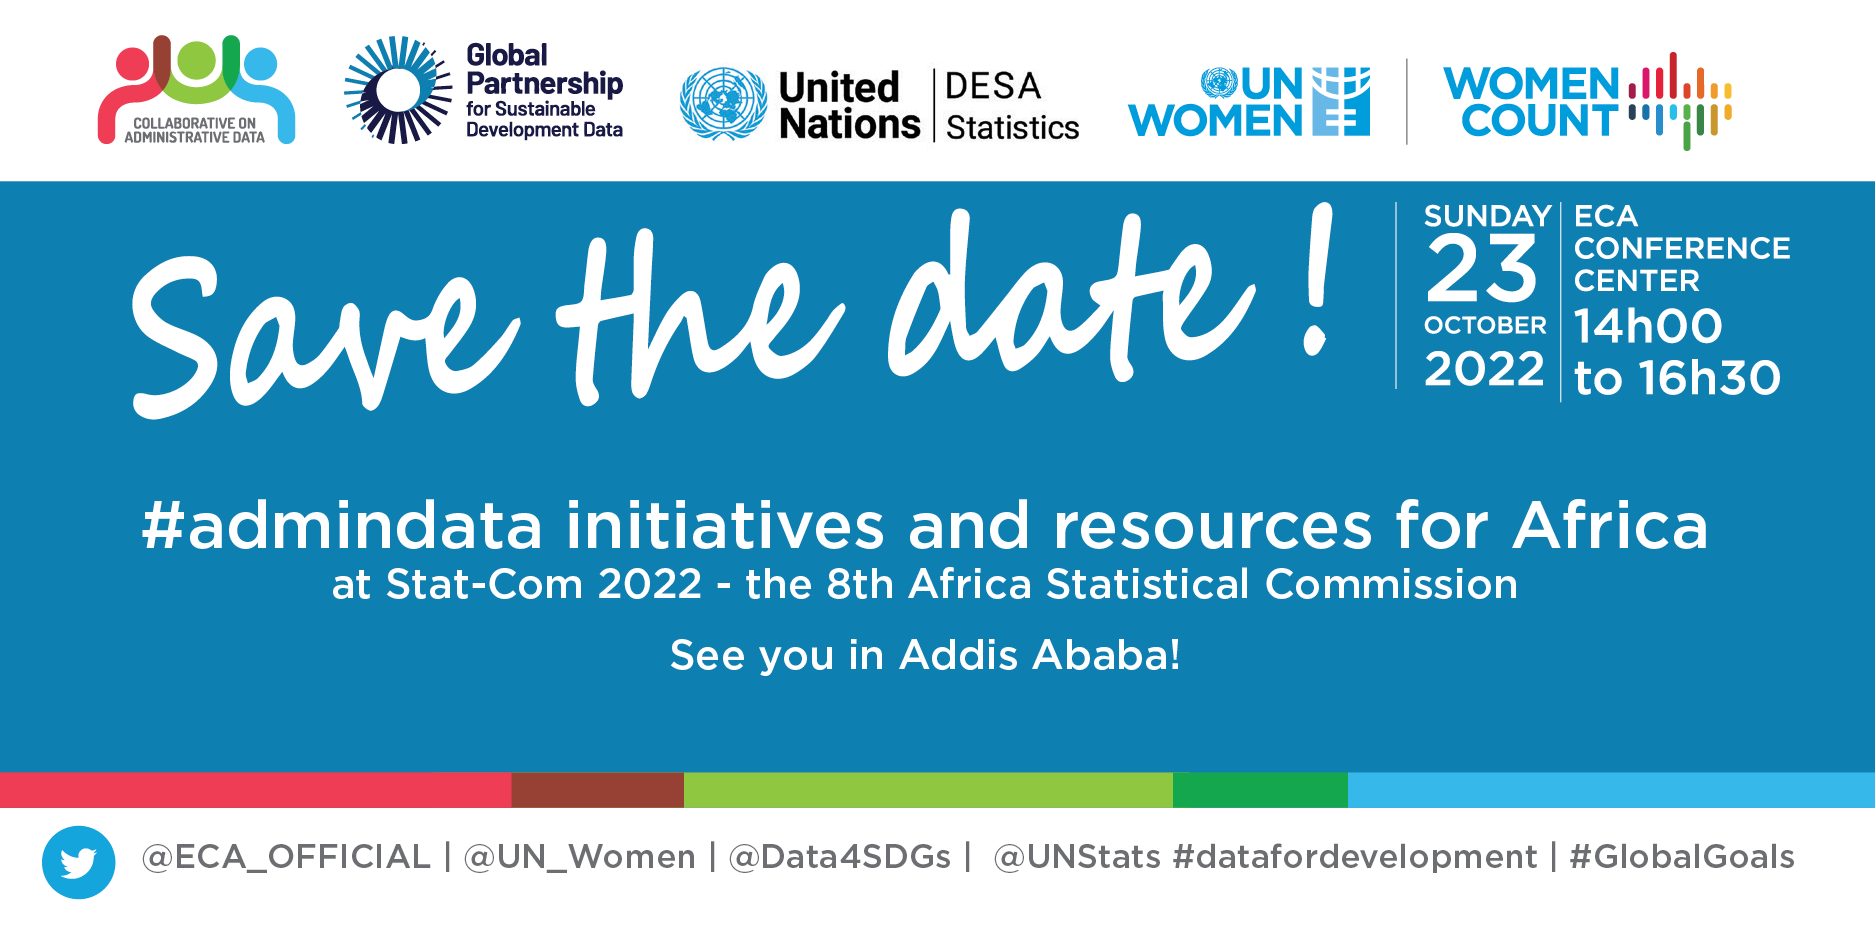 Save the date for CAD side event